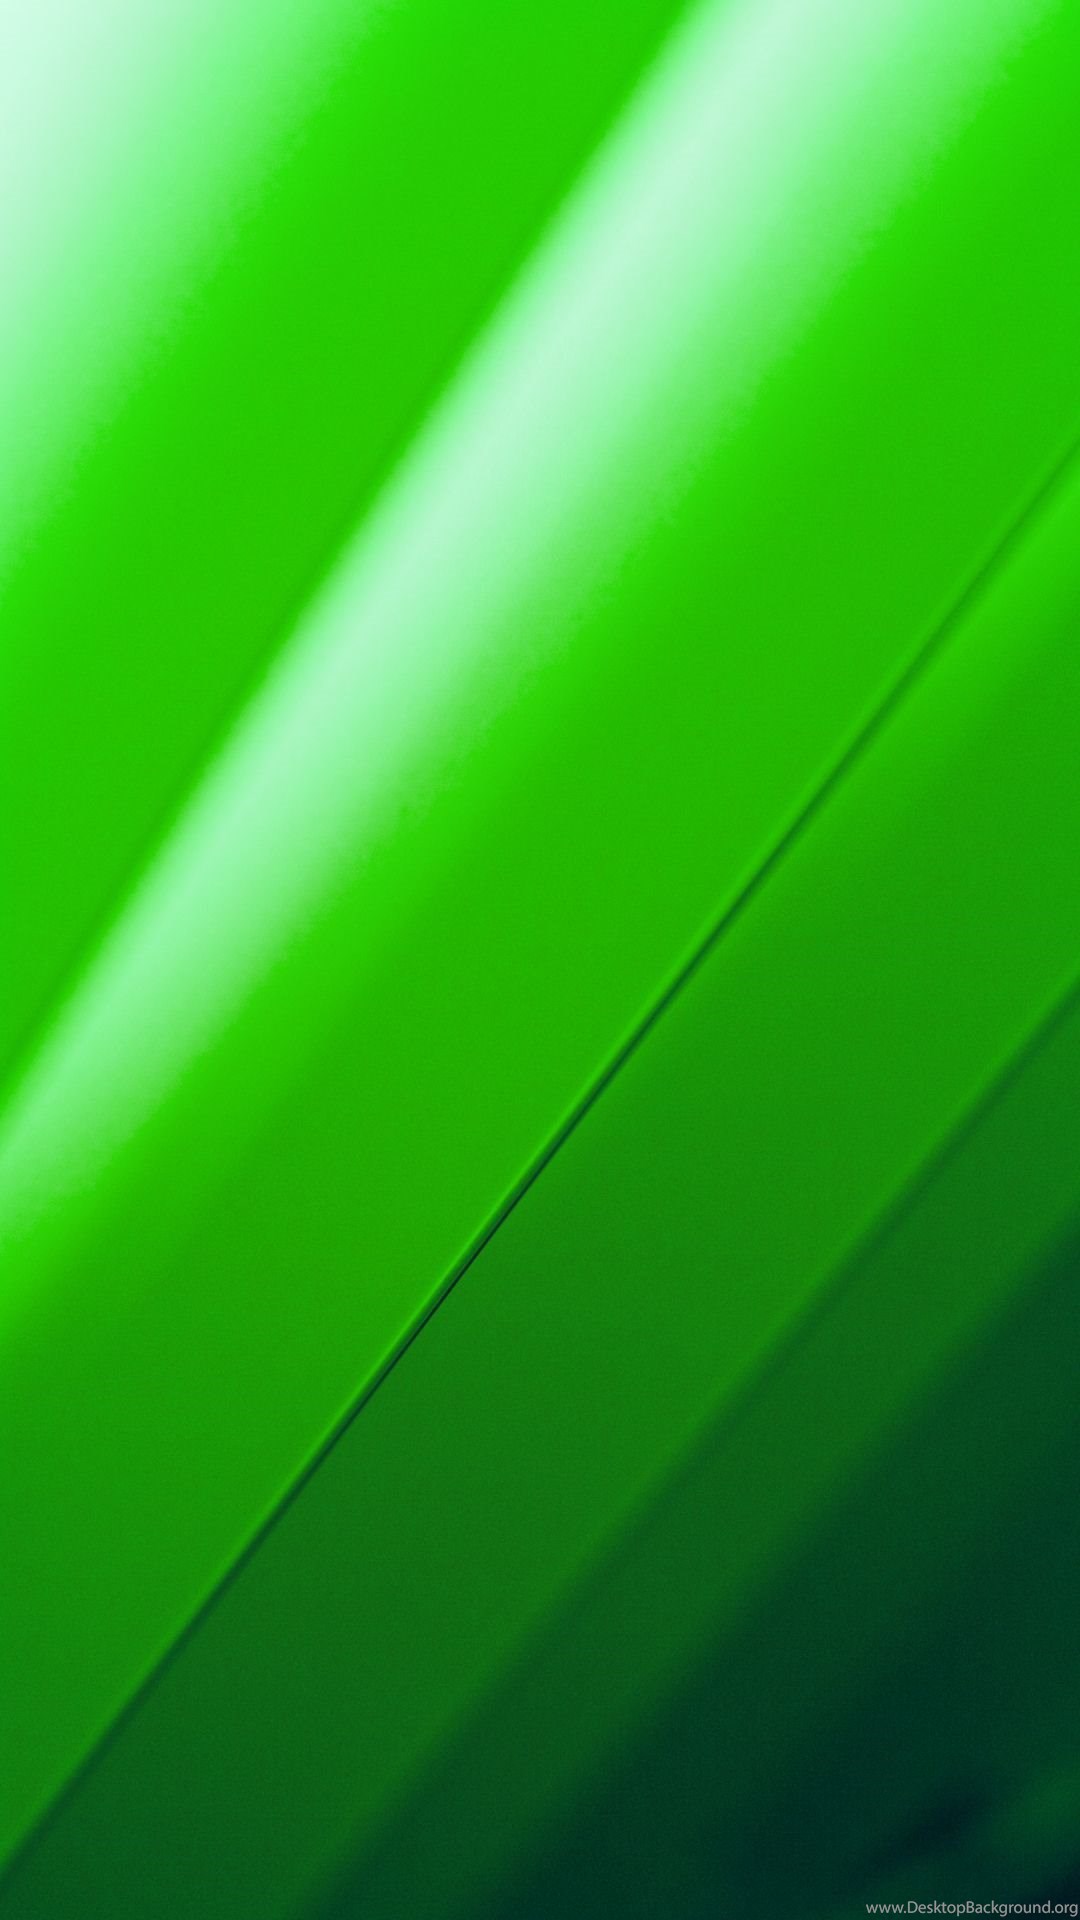 Huawei Honor 7 Wallpaper: A Simple Green Android Wallpaper Mobile. Desktop Background